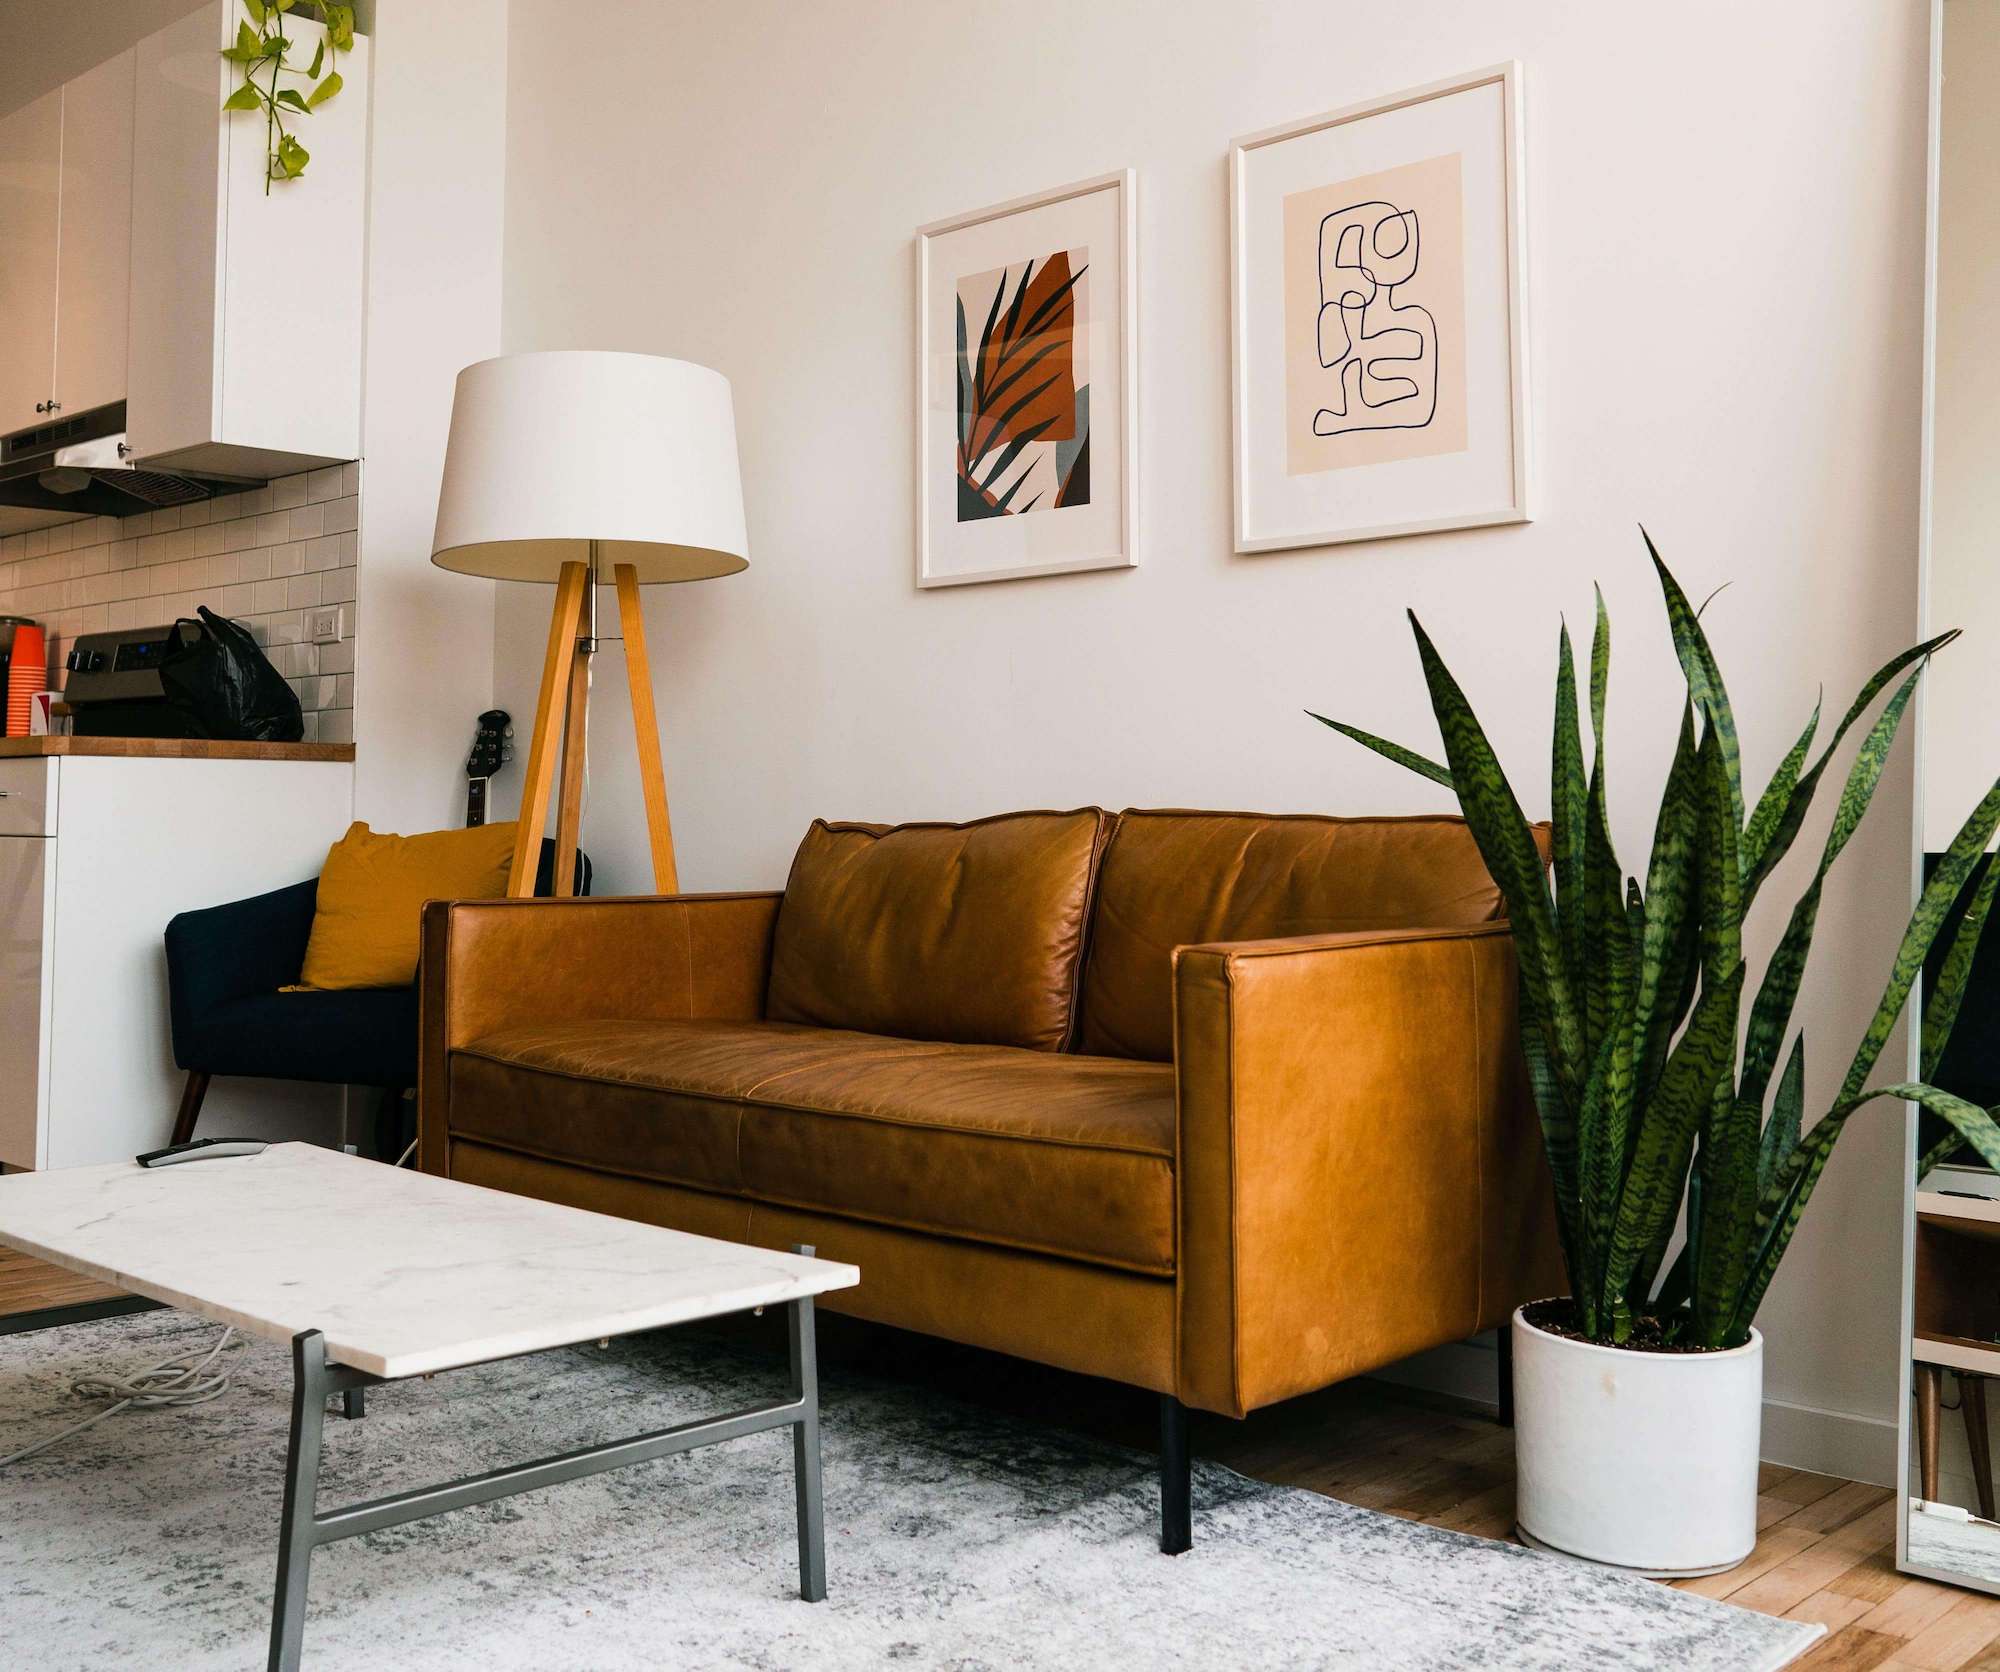 Living room with leather couch and plants